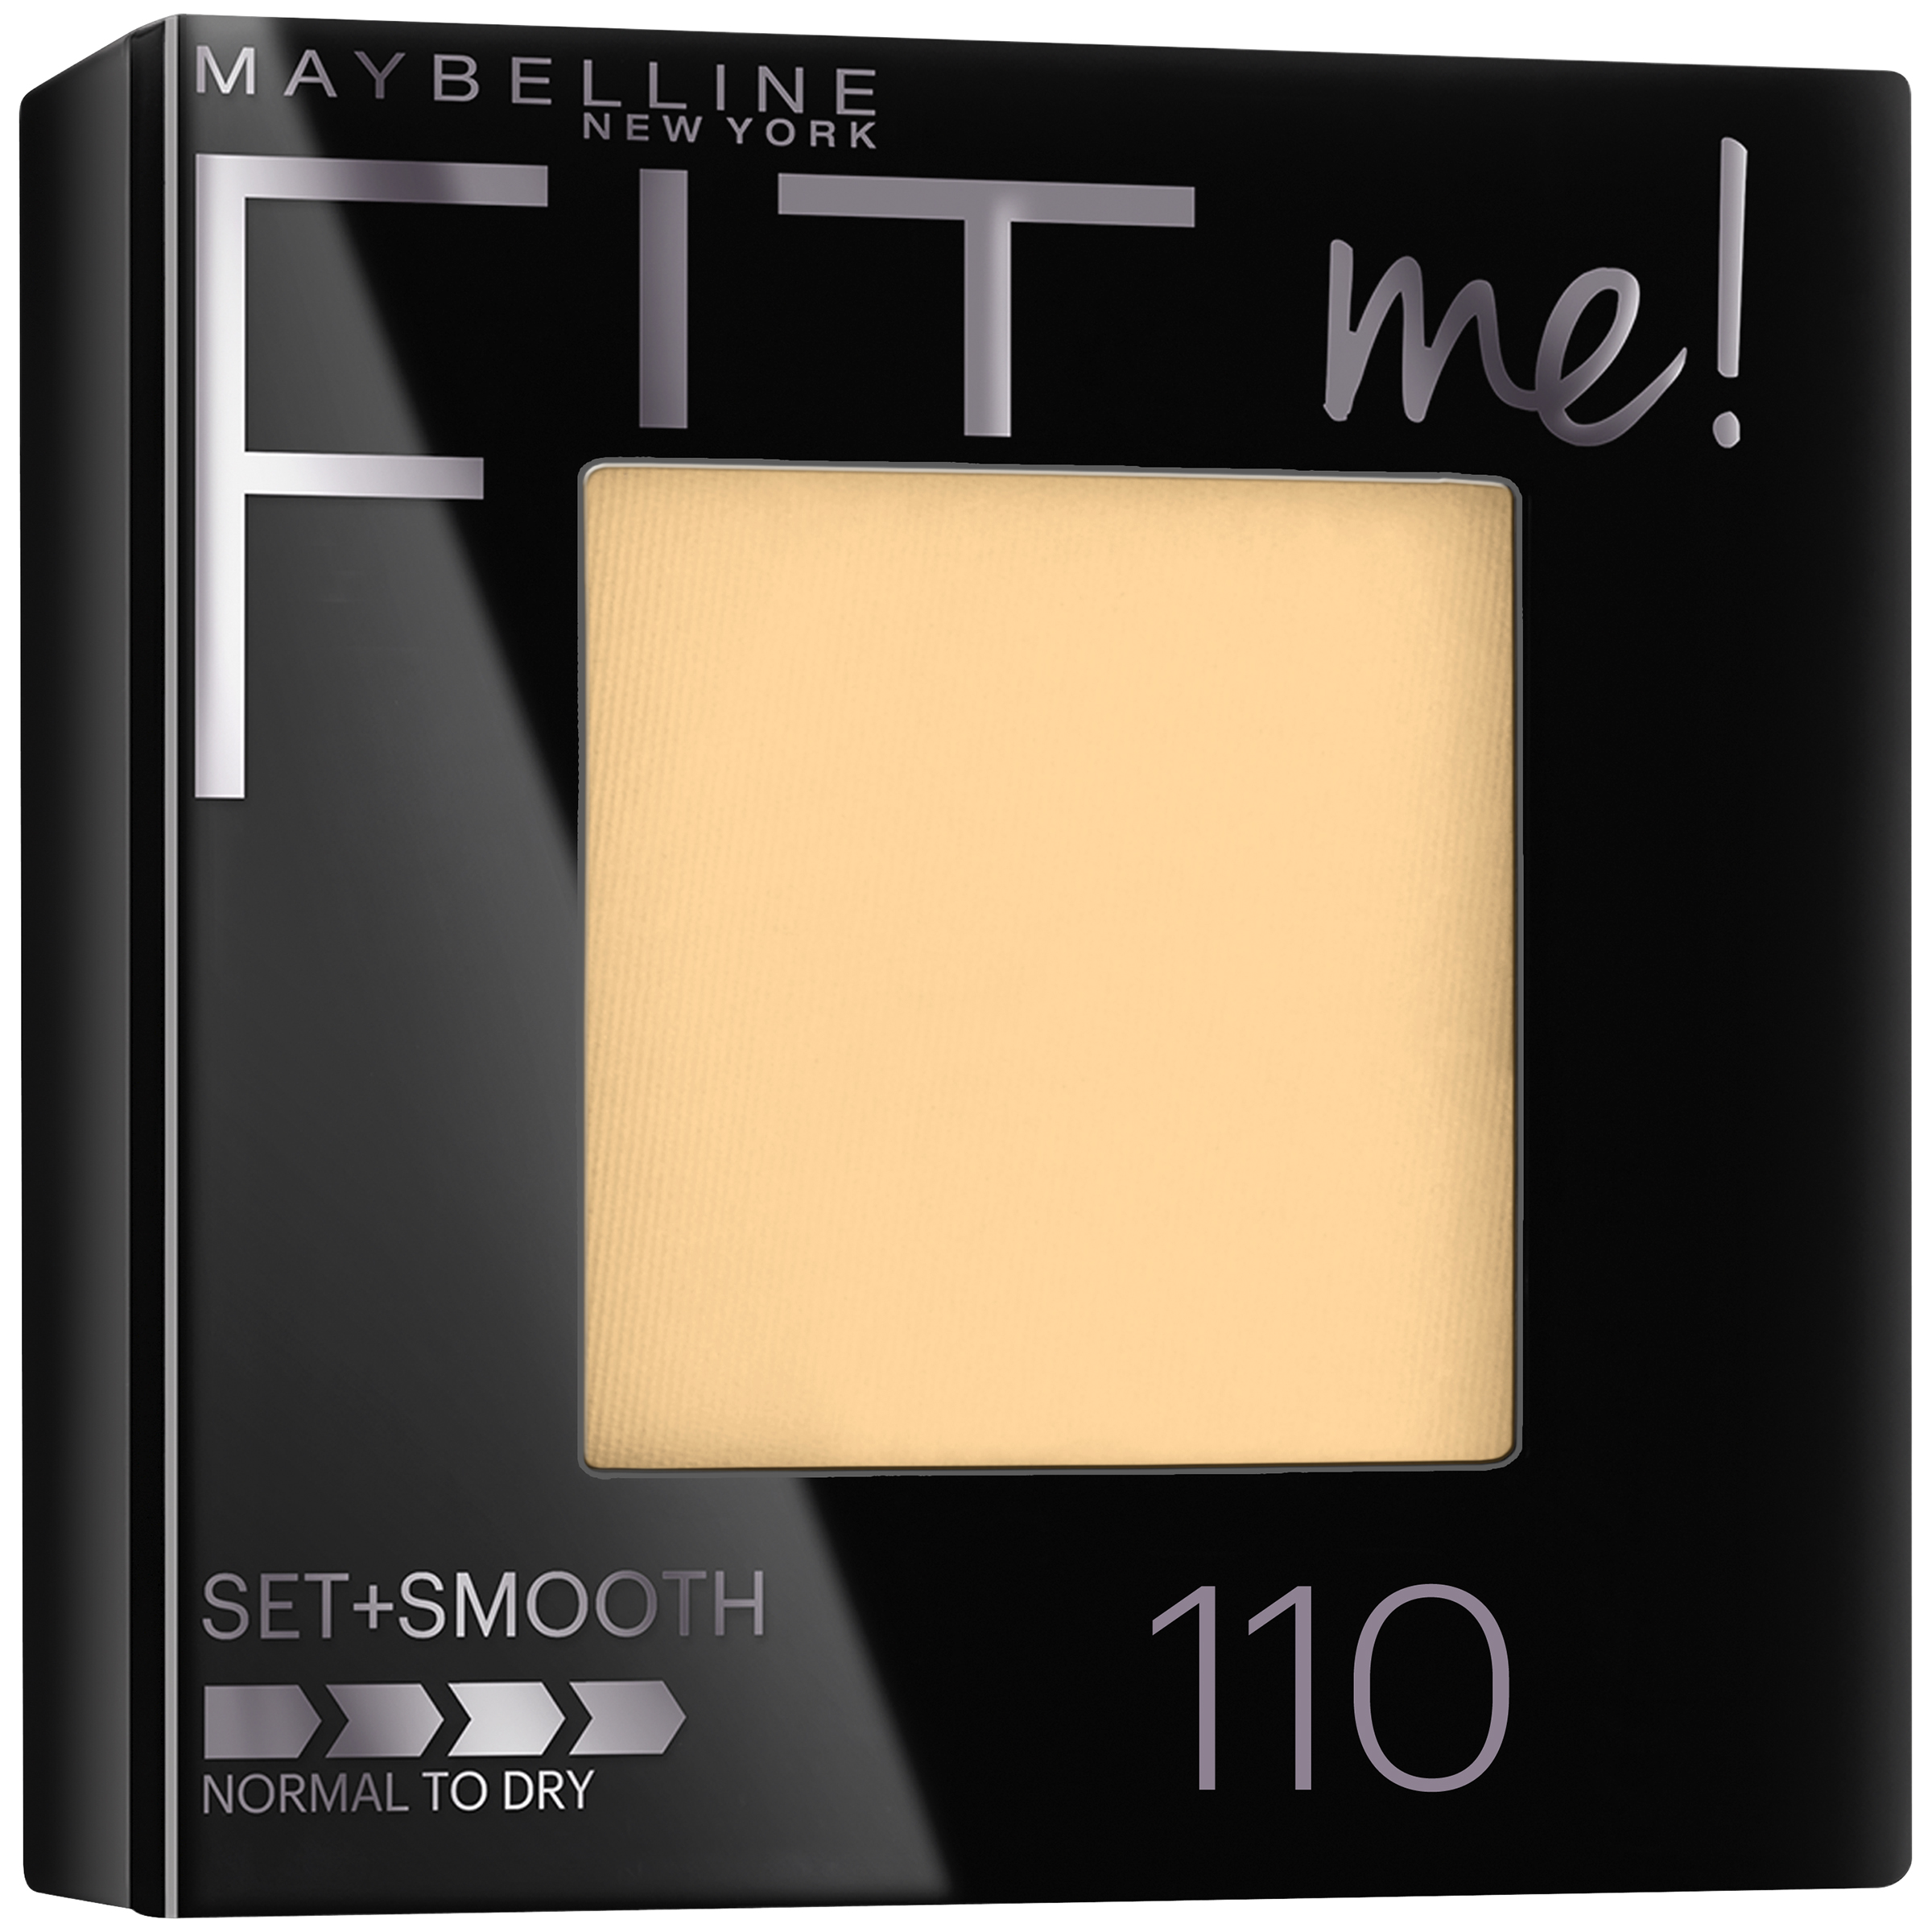 Maybelline New York Fit Me! Set+Smooth Powder